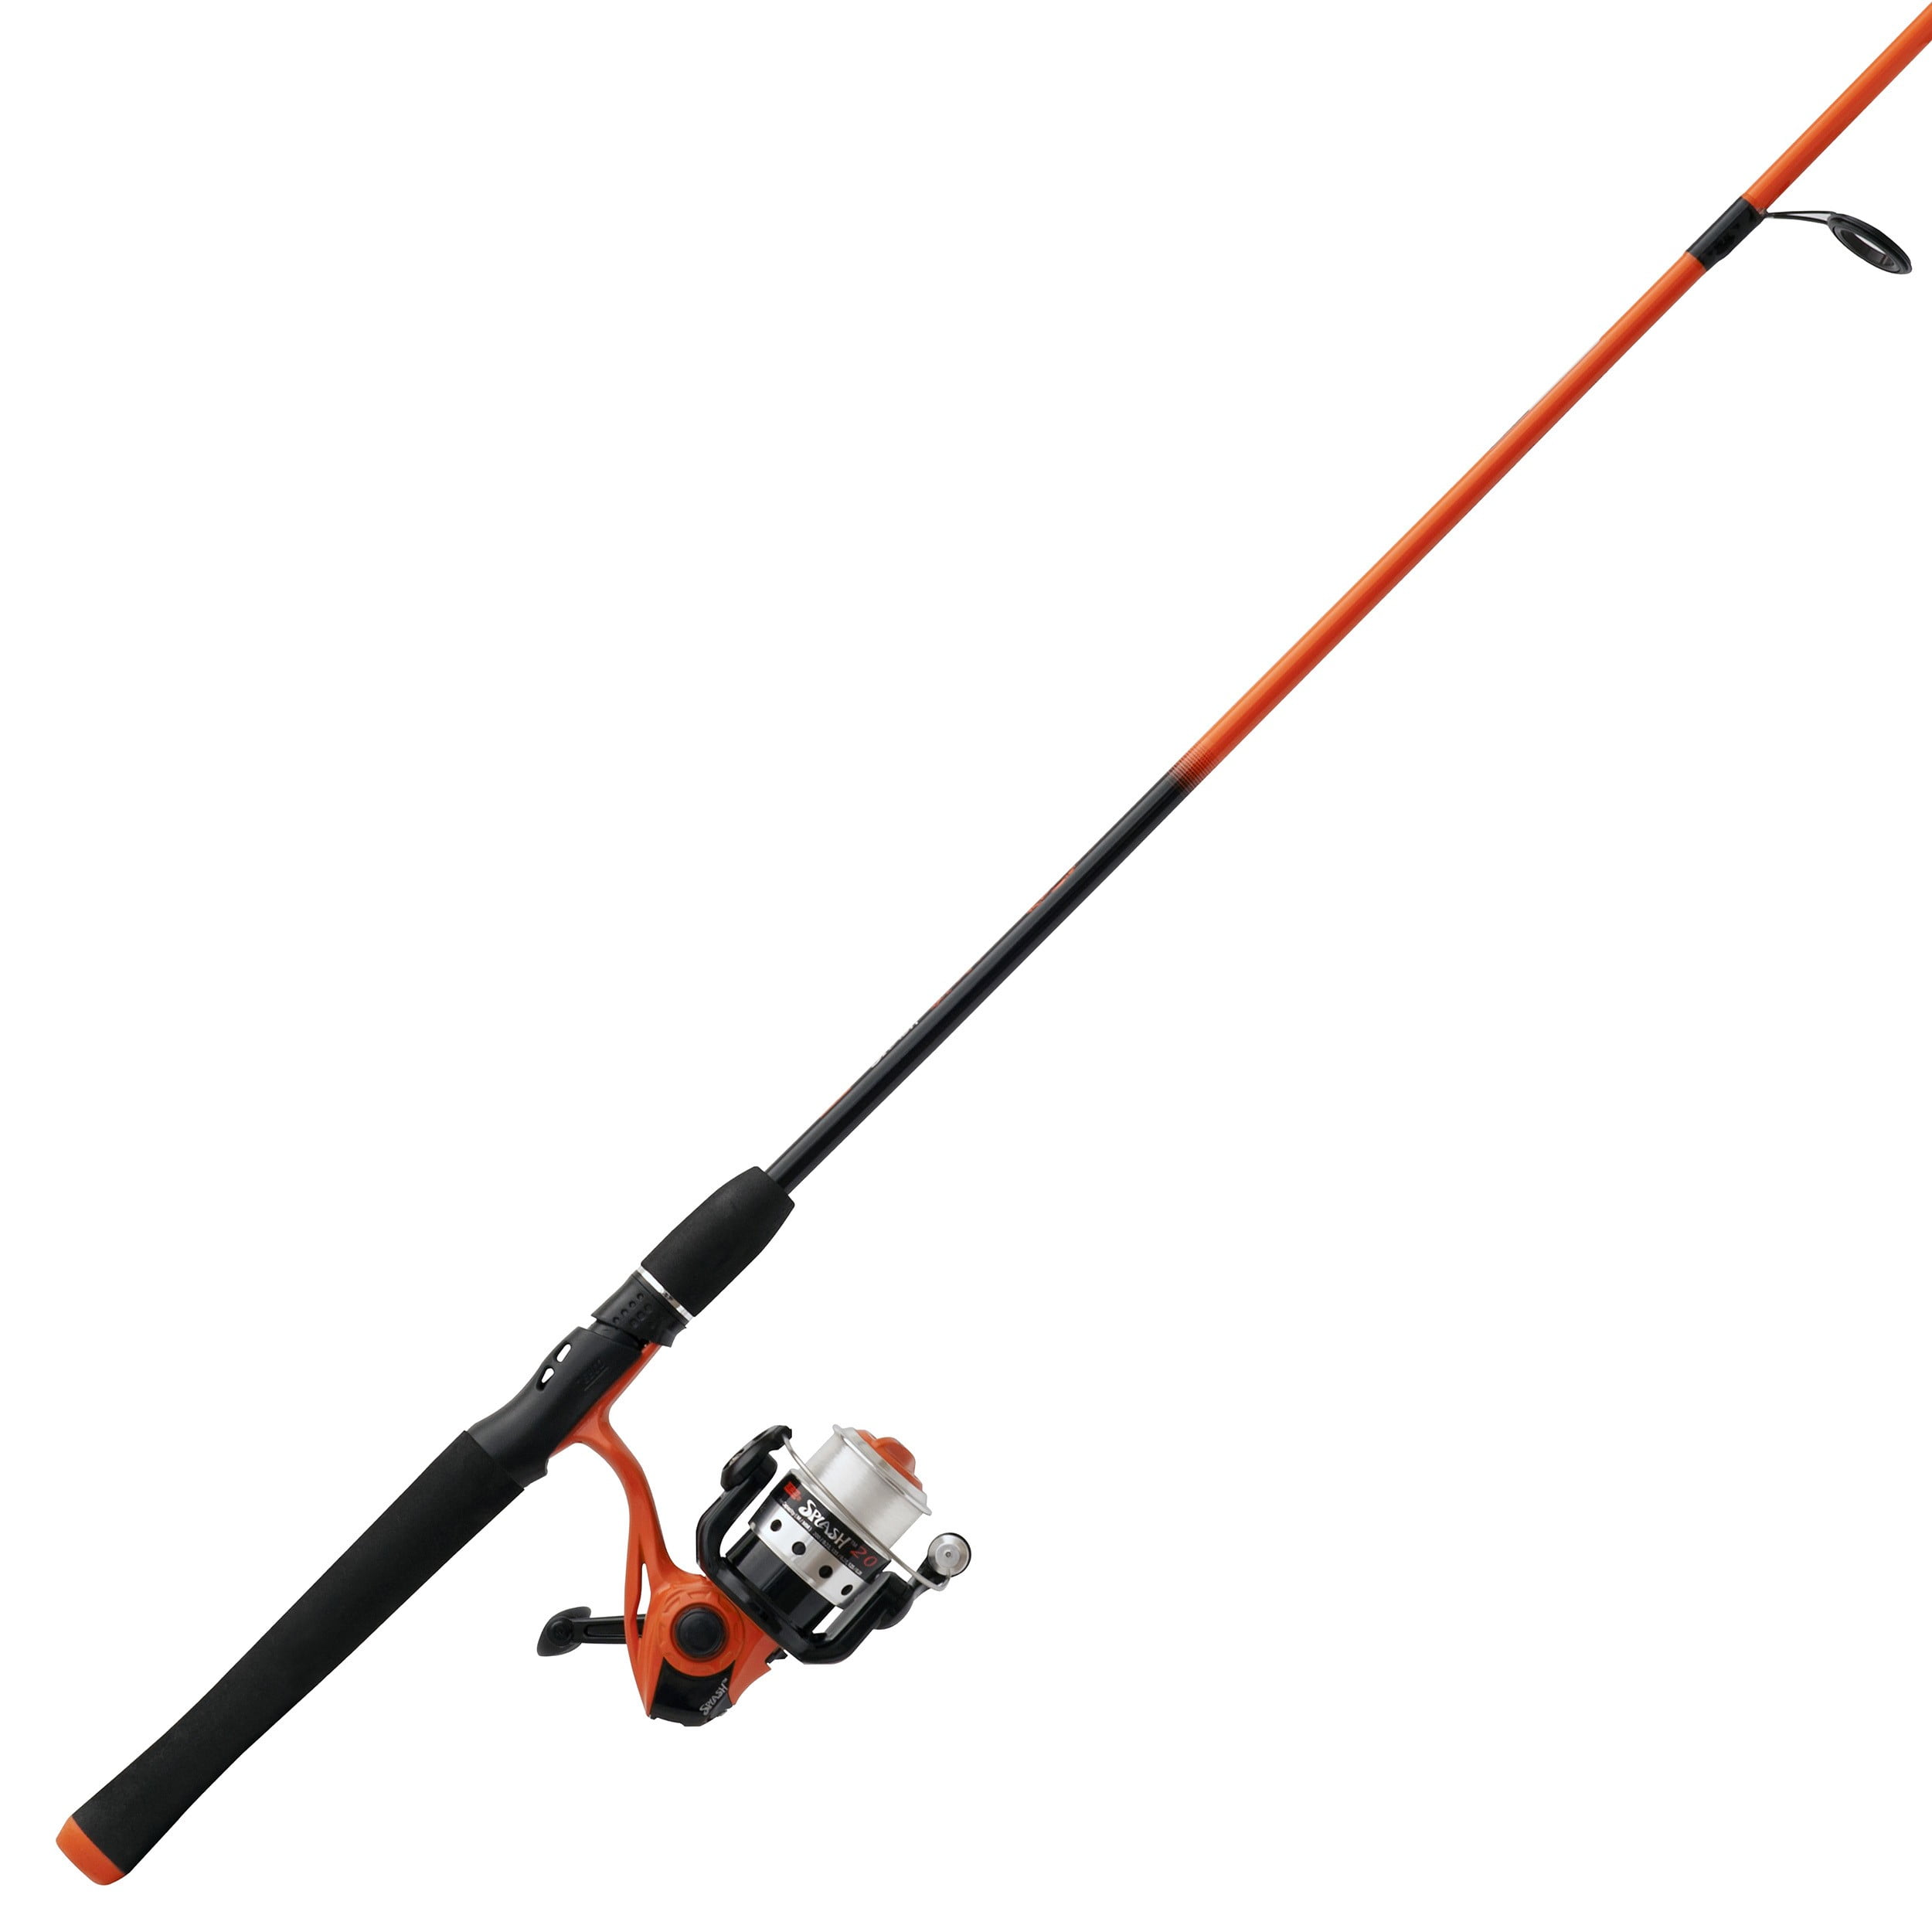 Zebco HotCast 2-Piece Spinning Fishing Rod, 4-Foot 6-inch (2-Piece Rod);  Assortment: Available - Fishing, Facebook Marketplace